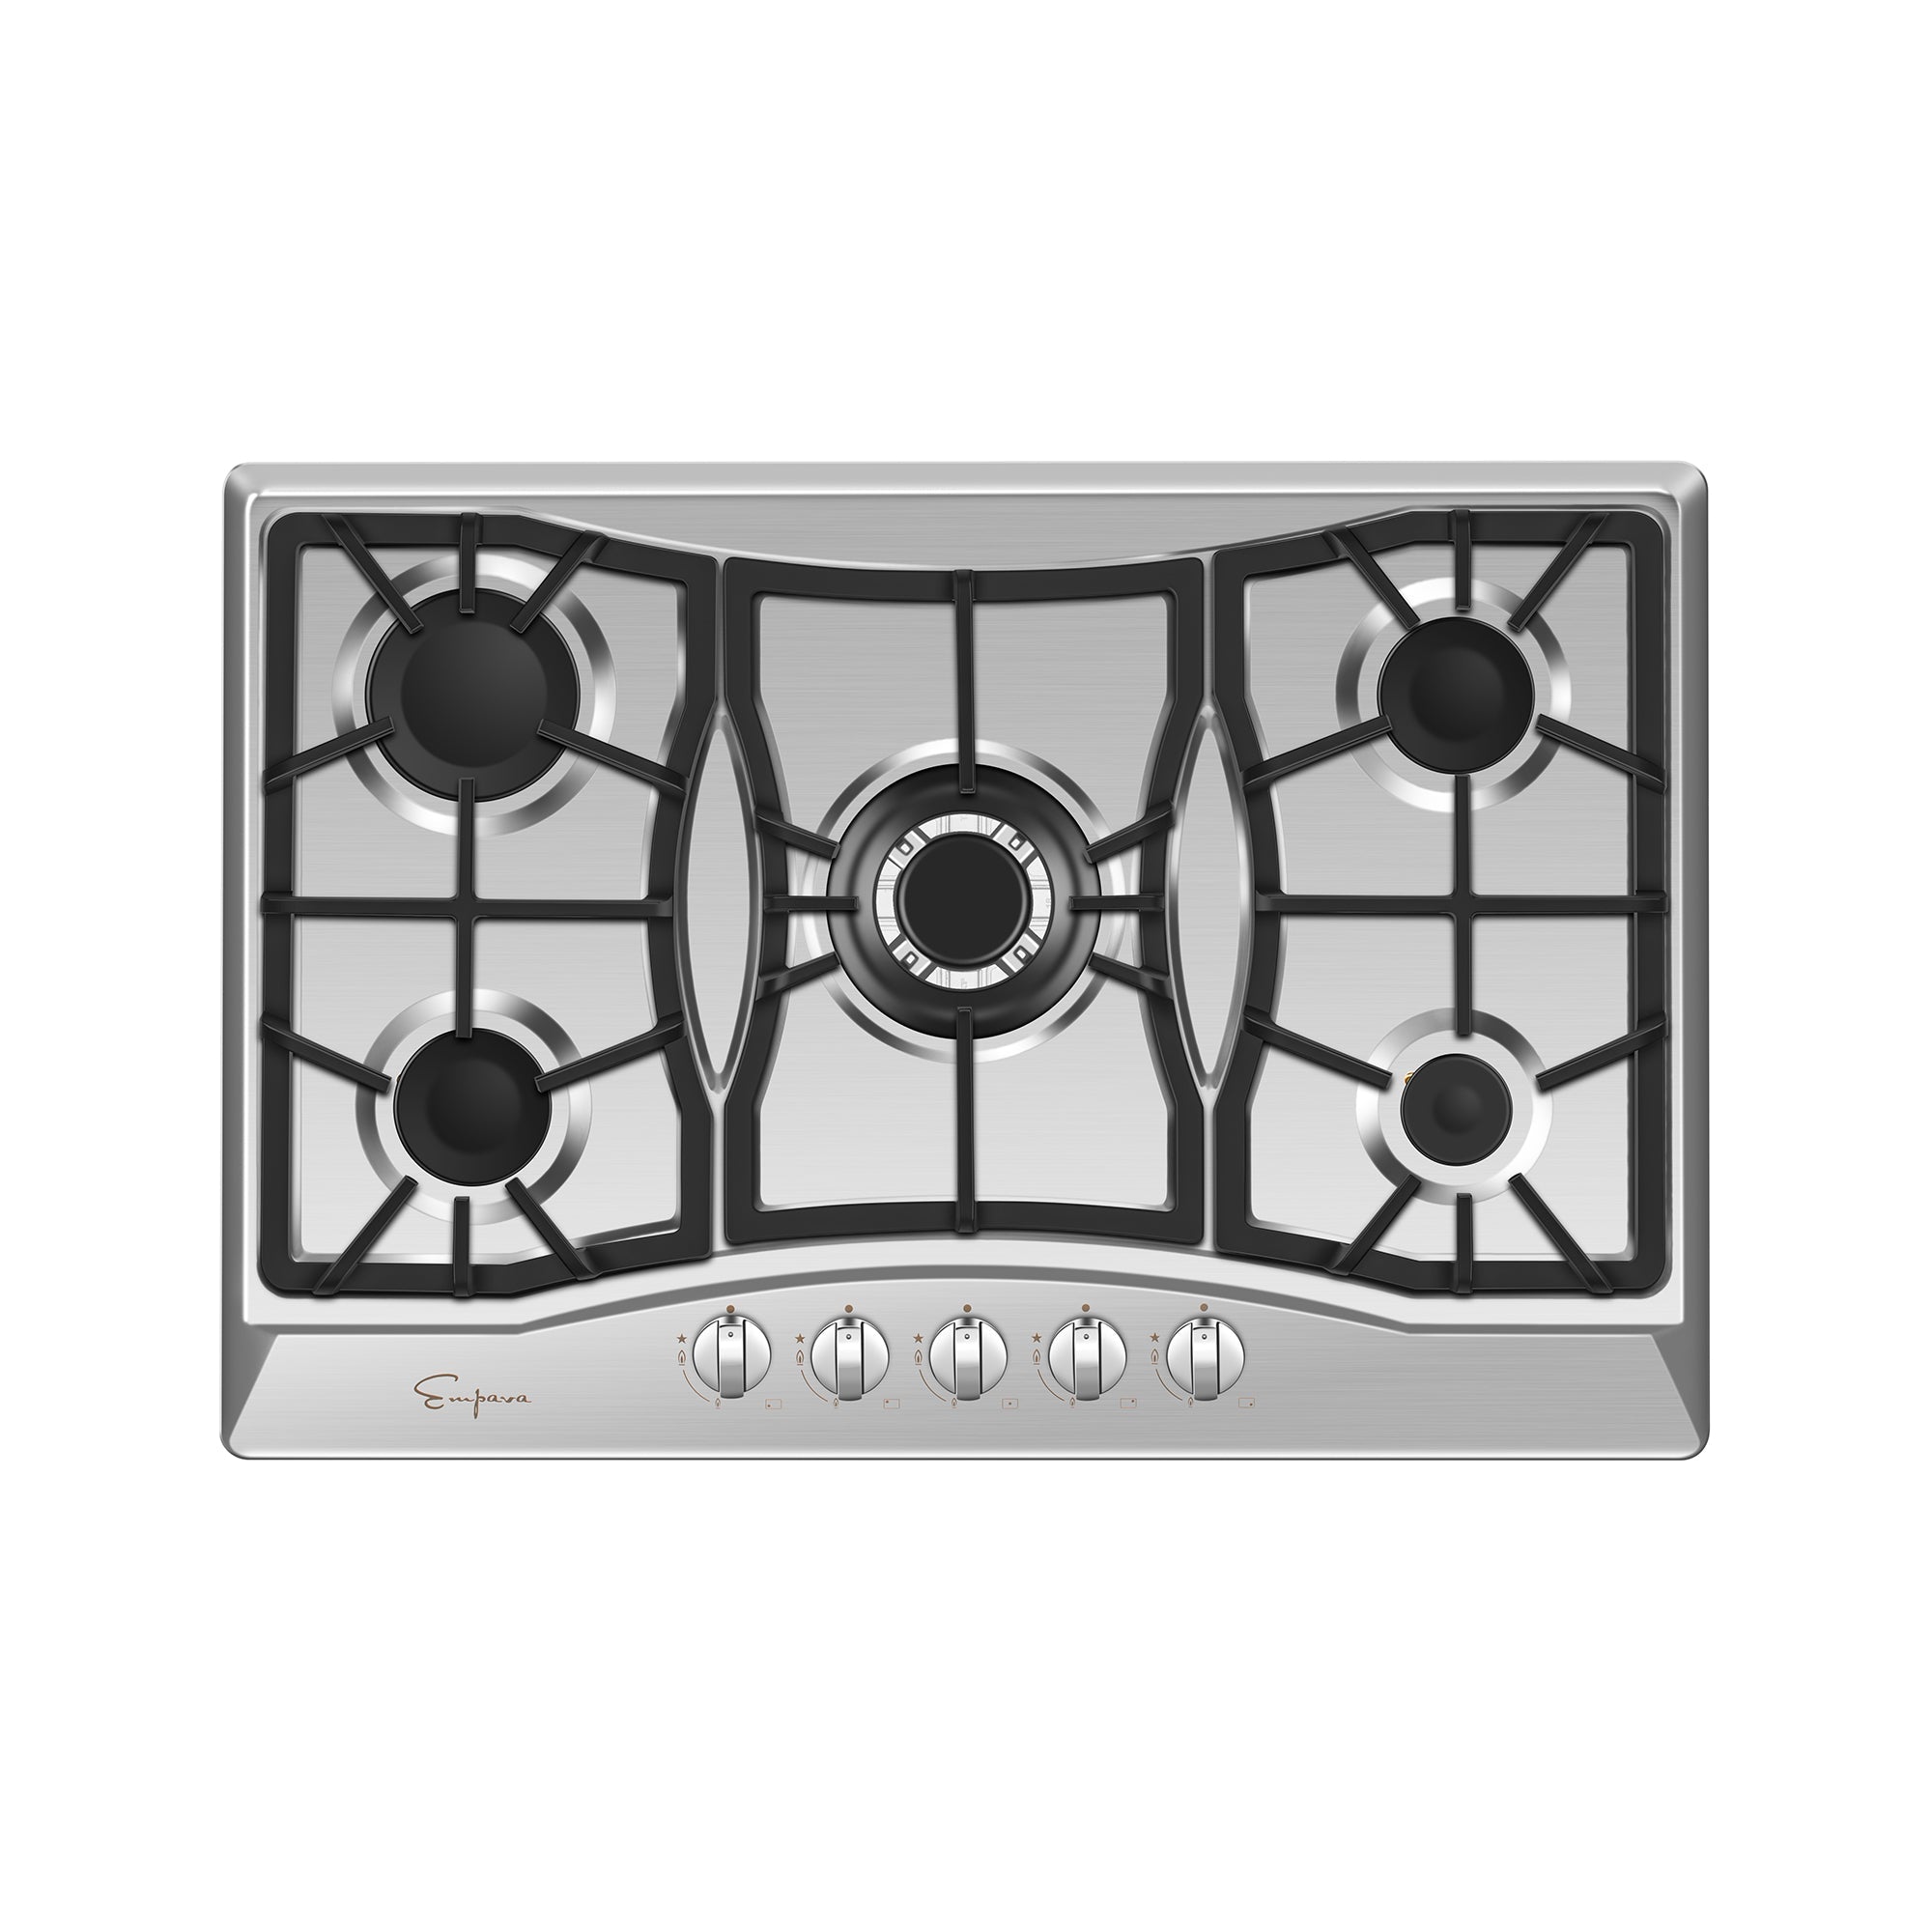 Empava 30GC21 30 in. Built-in Gas Stove Cooktop